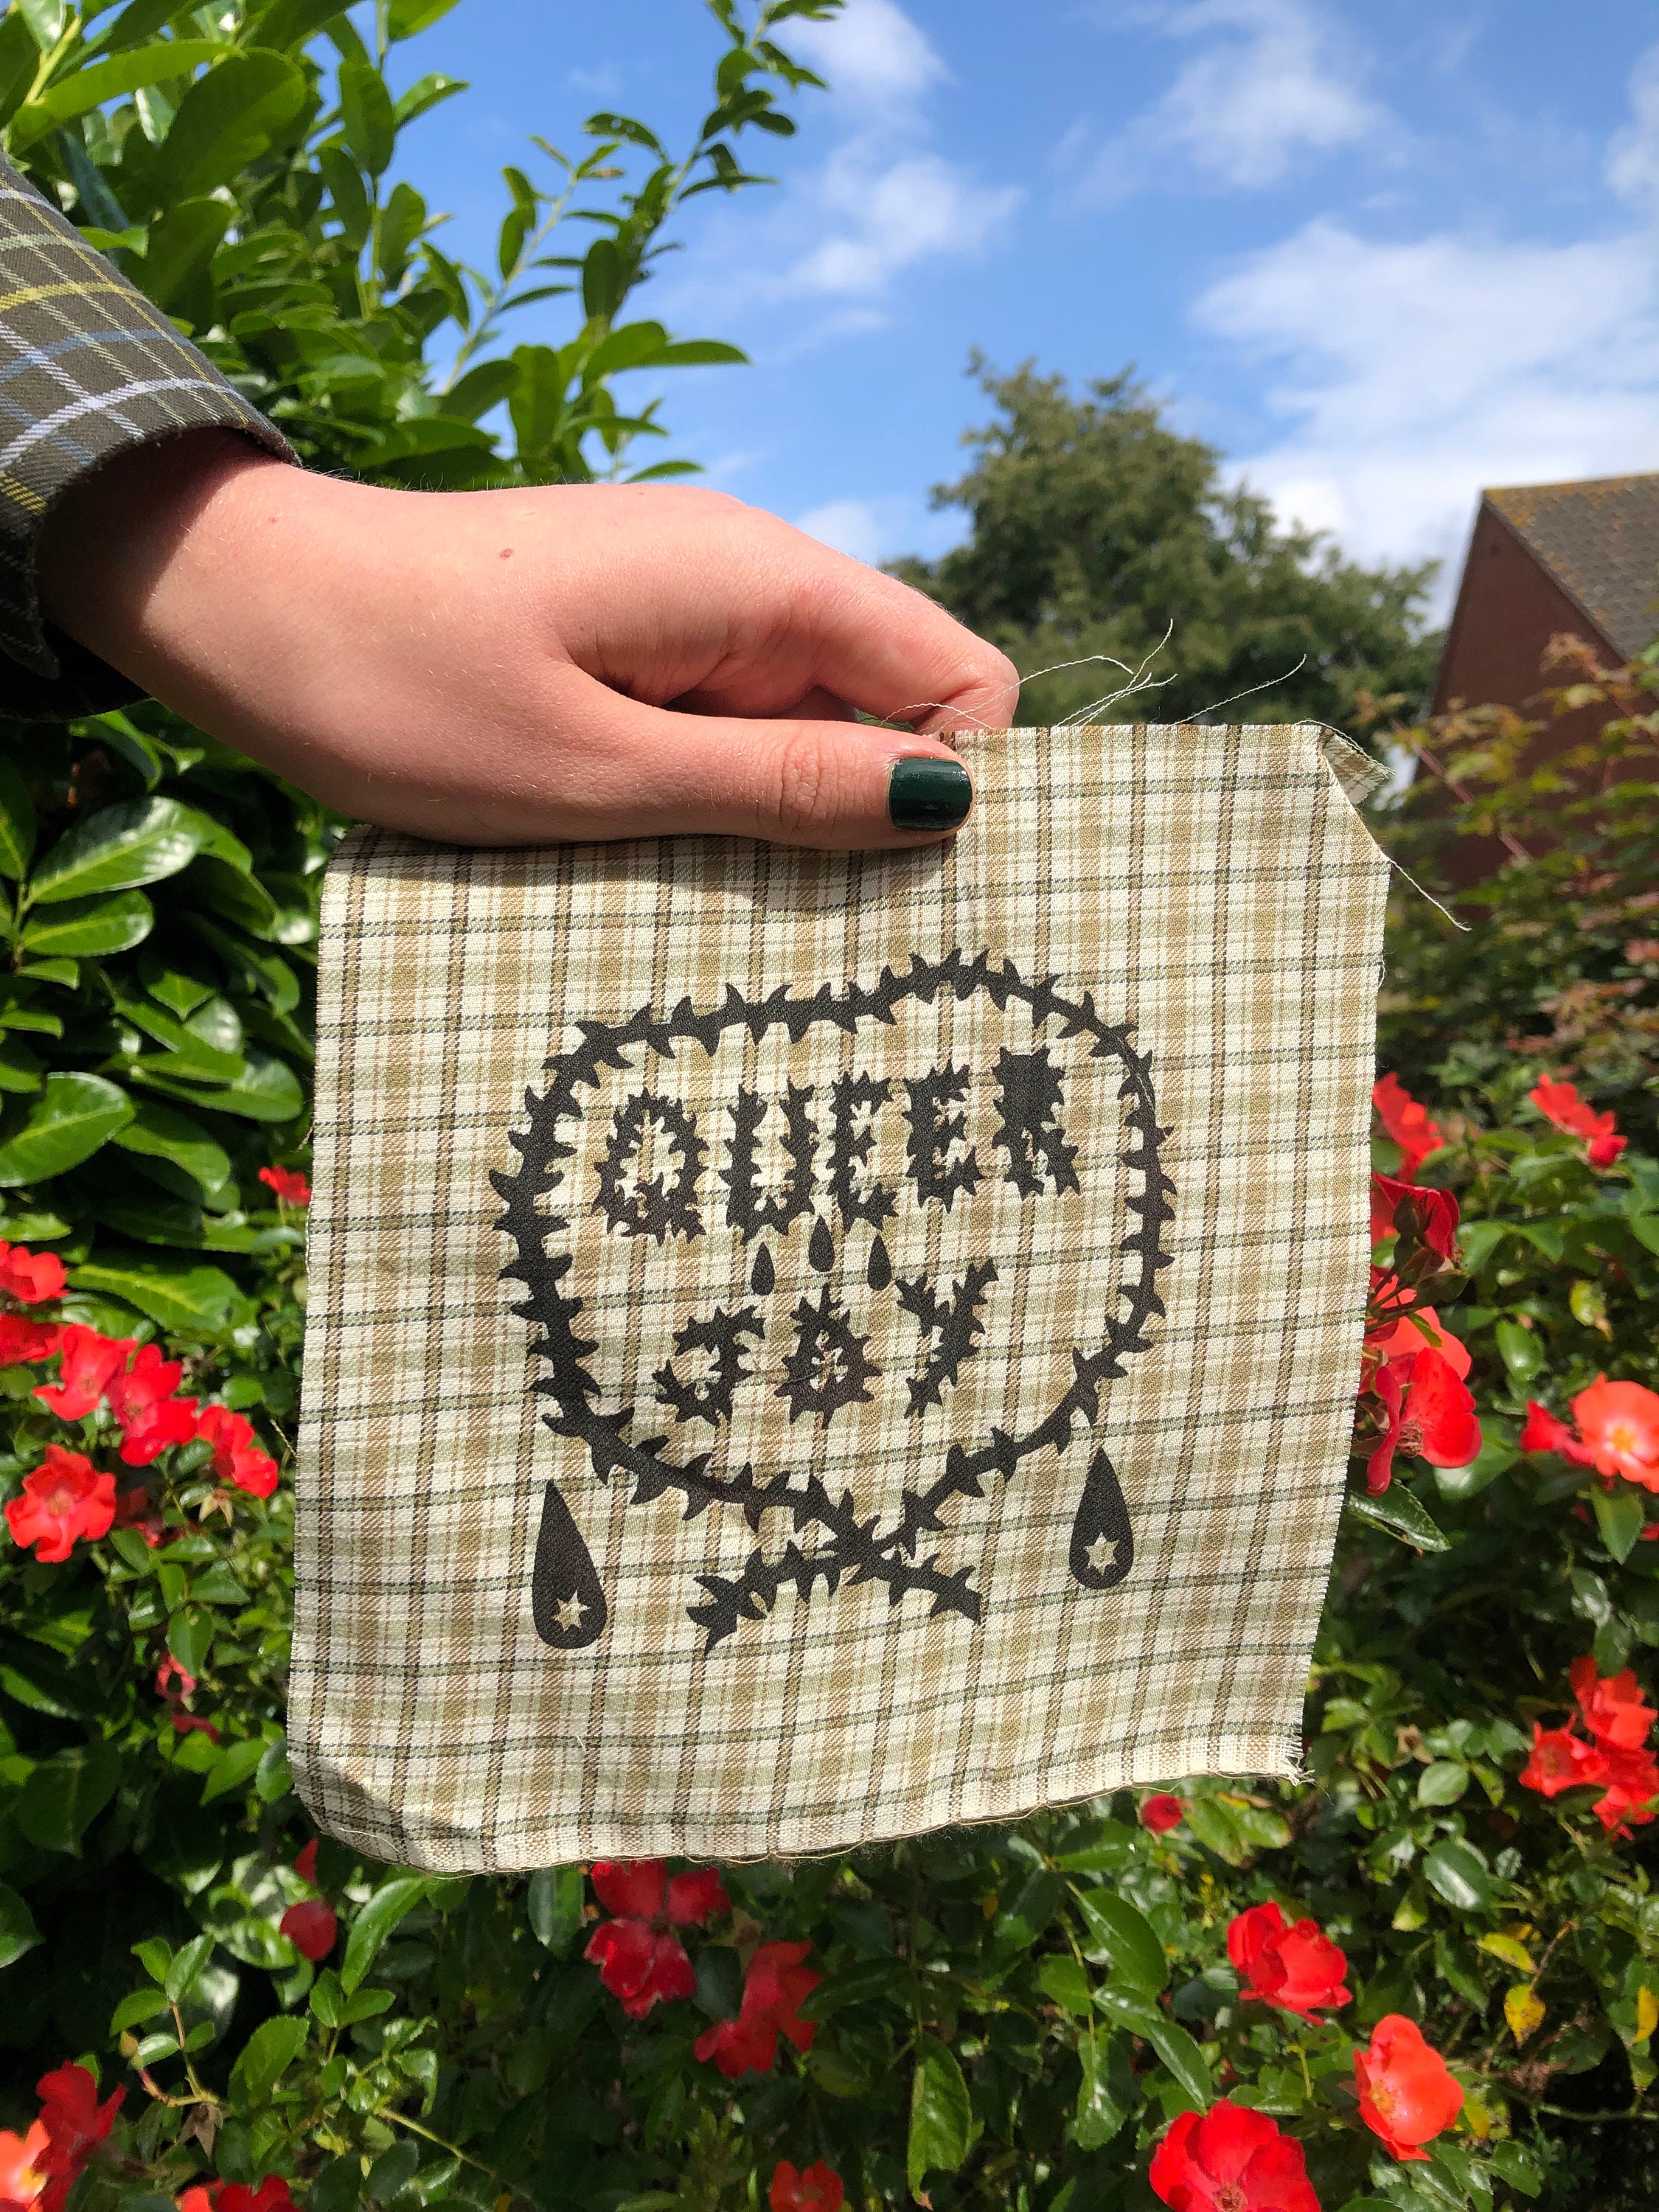 Queer Joy Thorny Patch Screen Printed On Secondhand Fabric